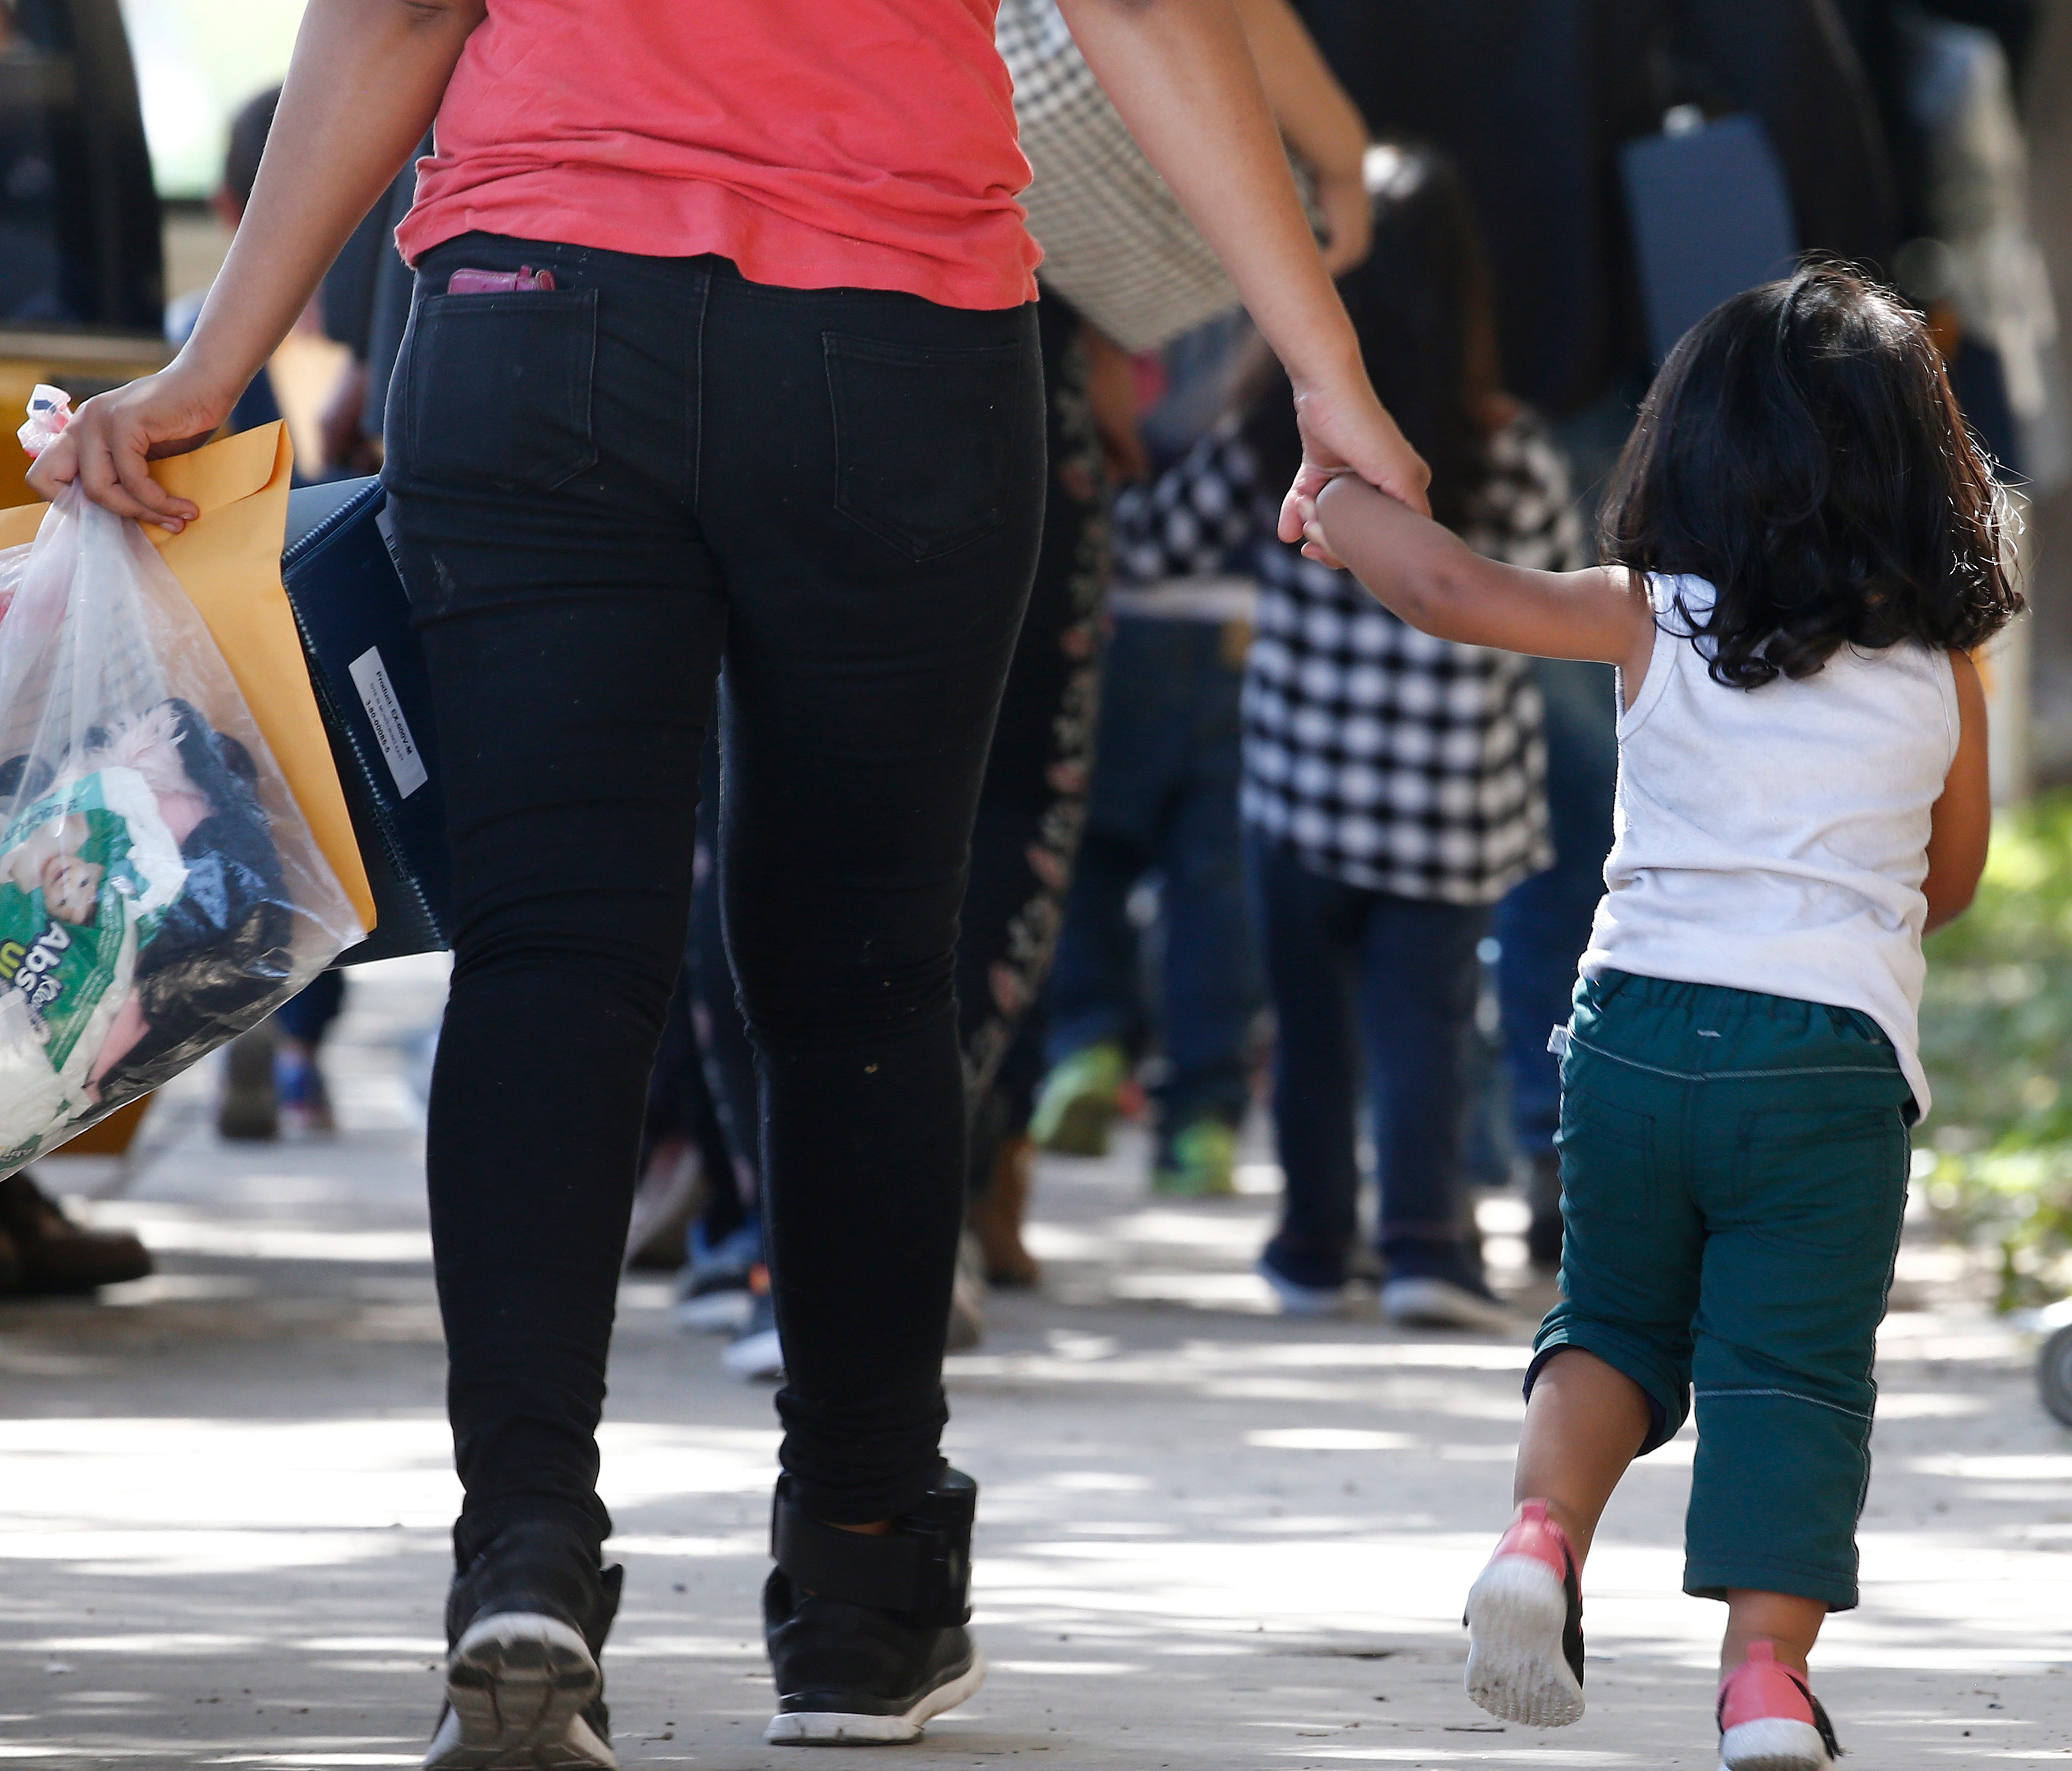 A little girl and a woman along with other migrant families cross the street after being processed at the Central Bus Station before being taken to Catholic Charities before being removed in McAllen, Texas 26 June 2018. Immigration along the Rio Gran